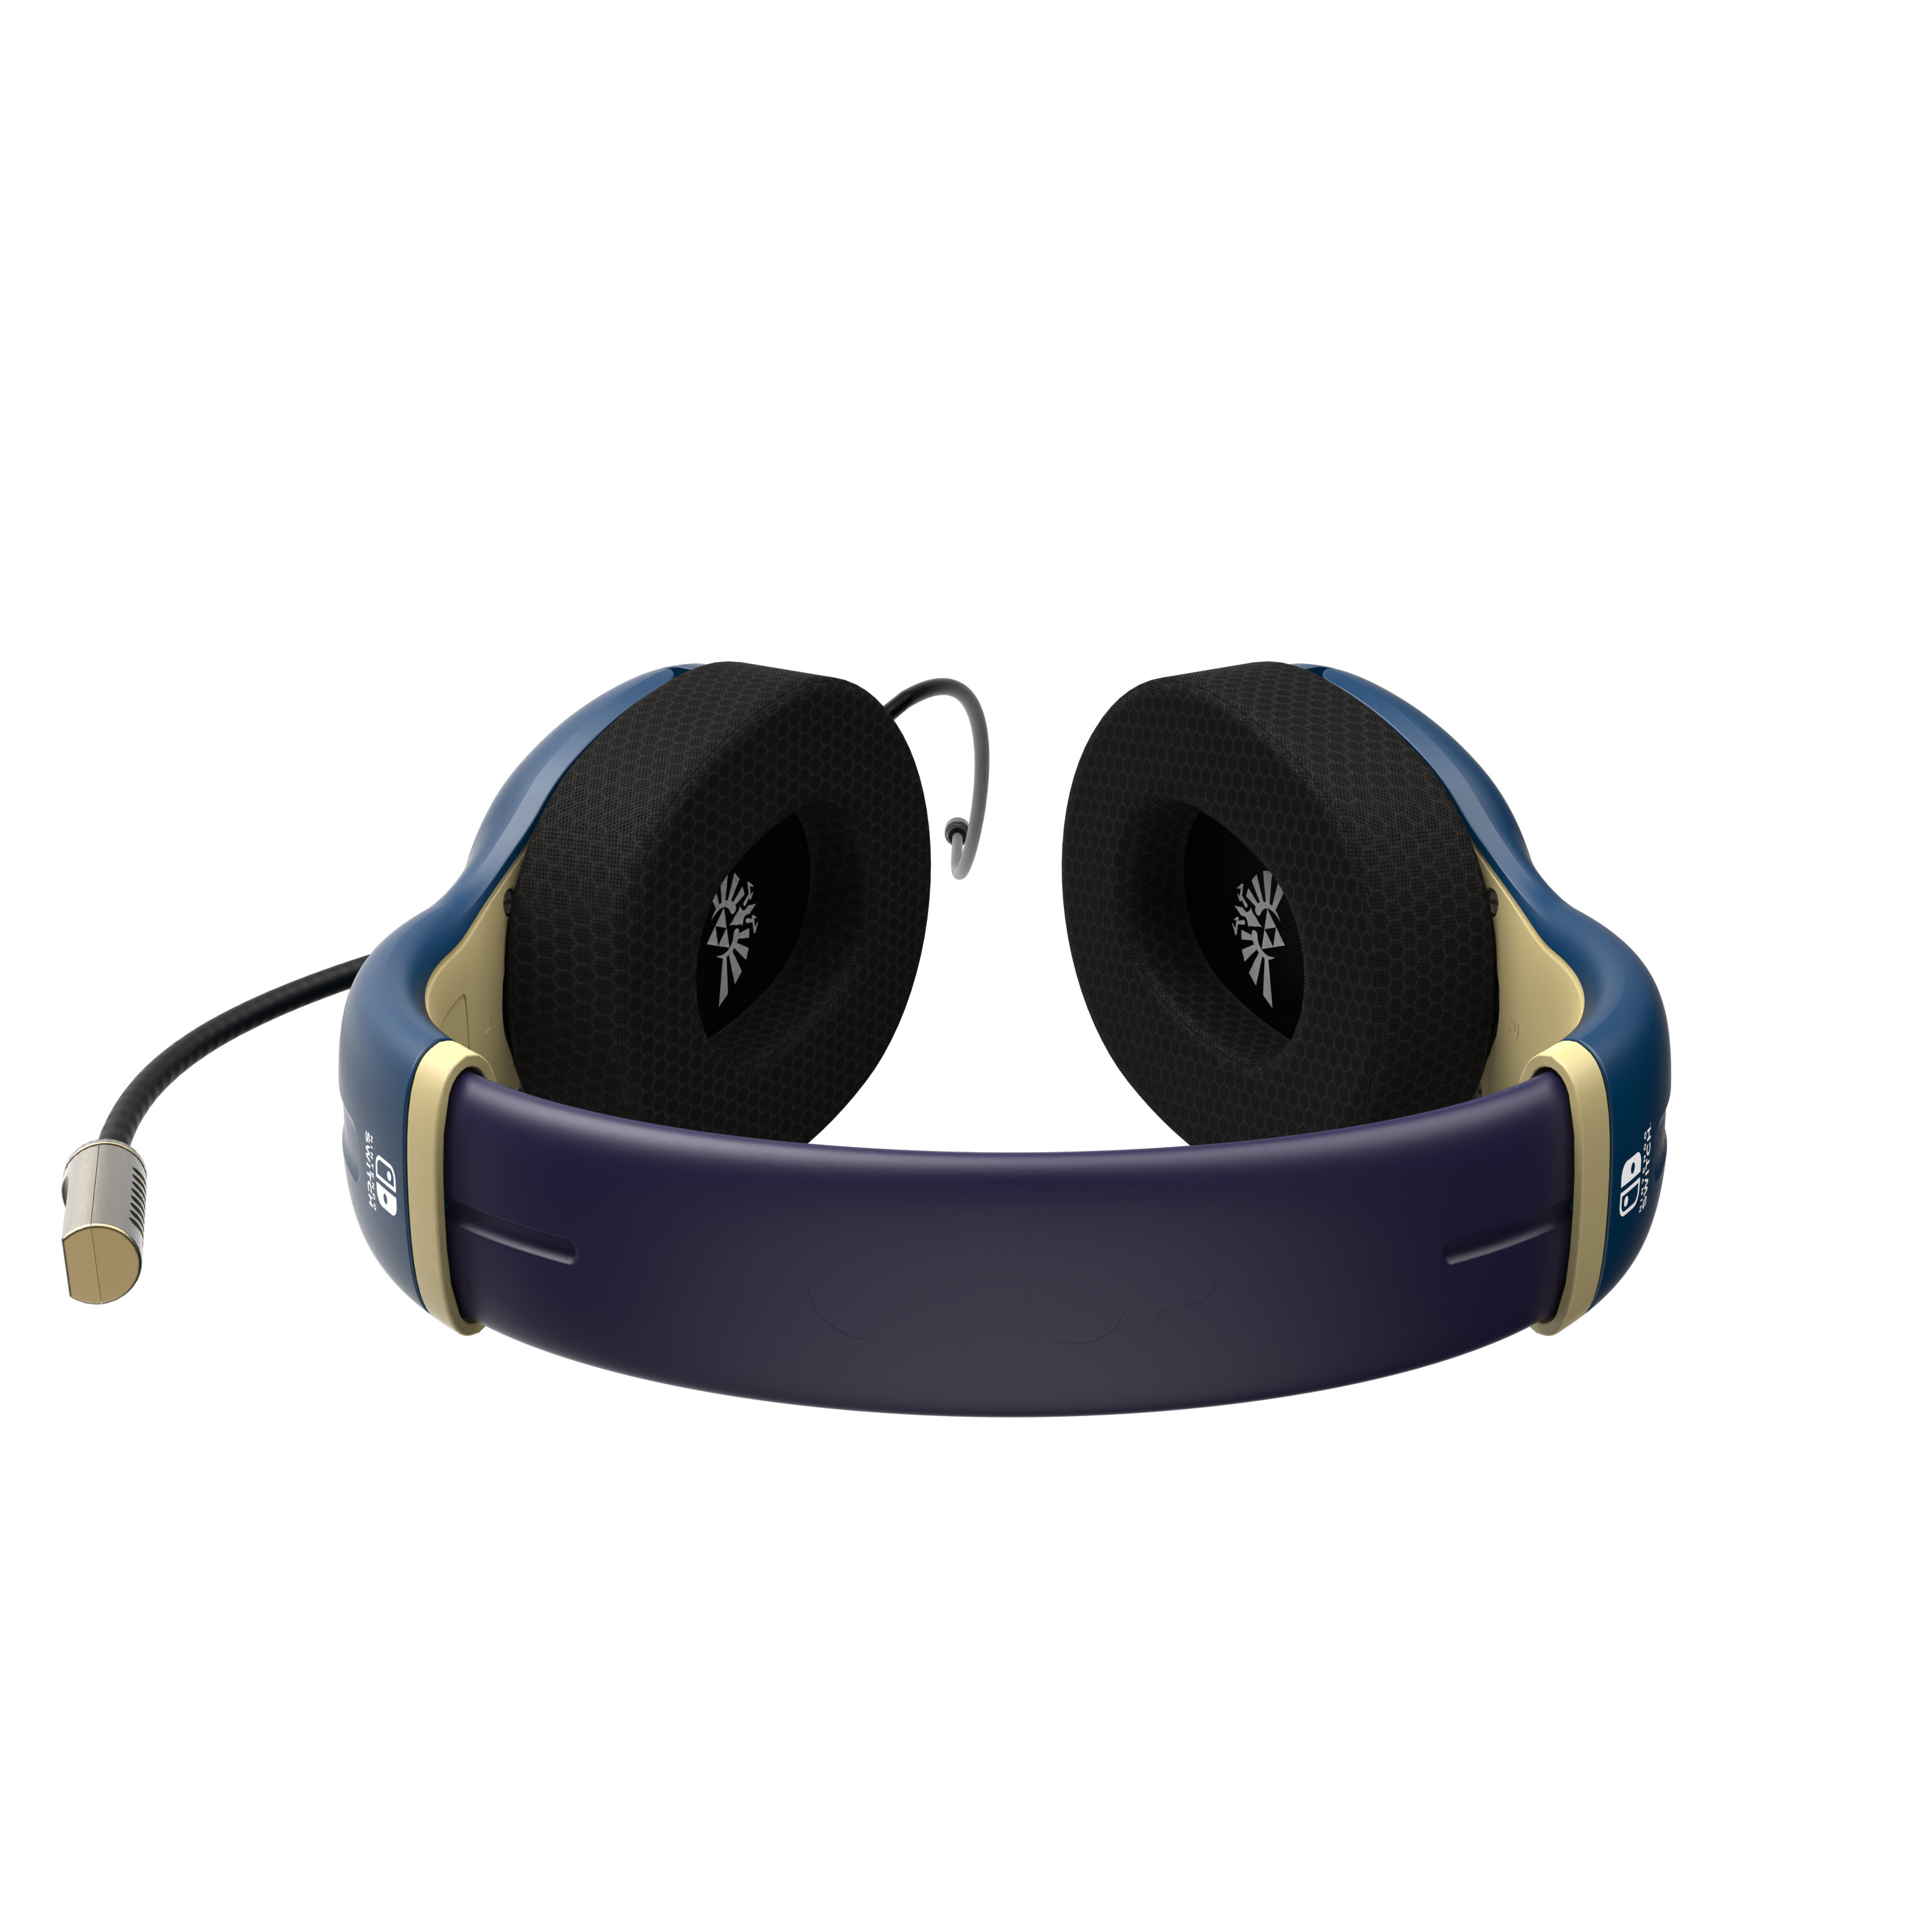 PDP Airlite Wired Headset 500-162-HLBL NSW, Hyrule Blue